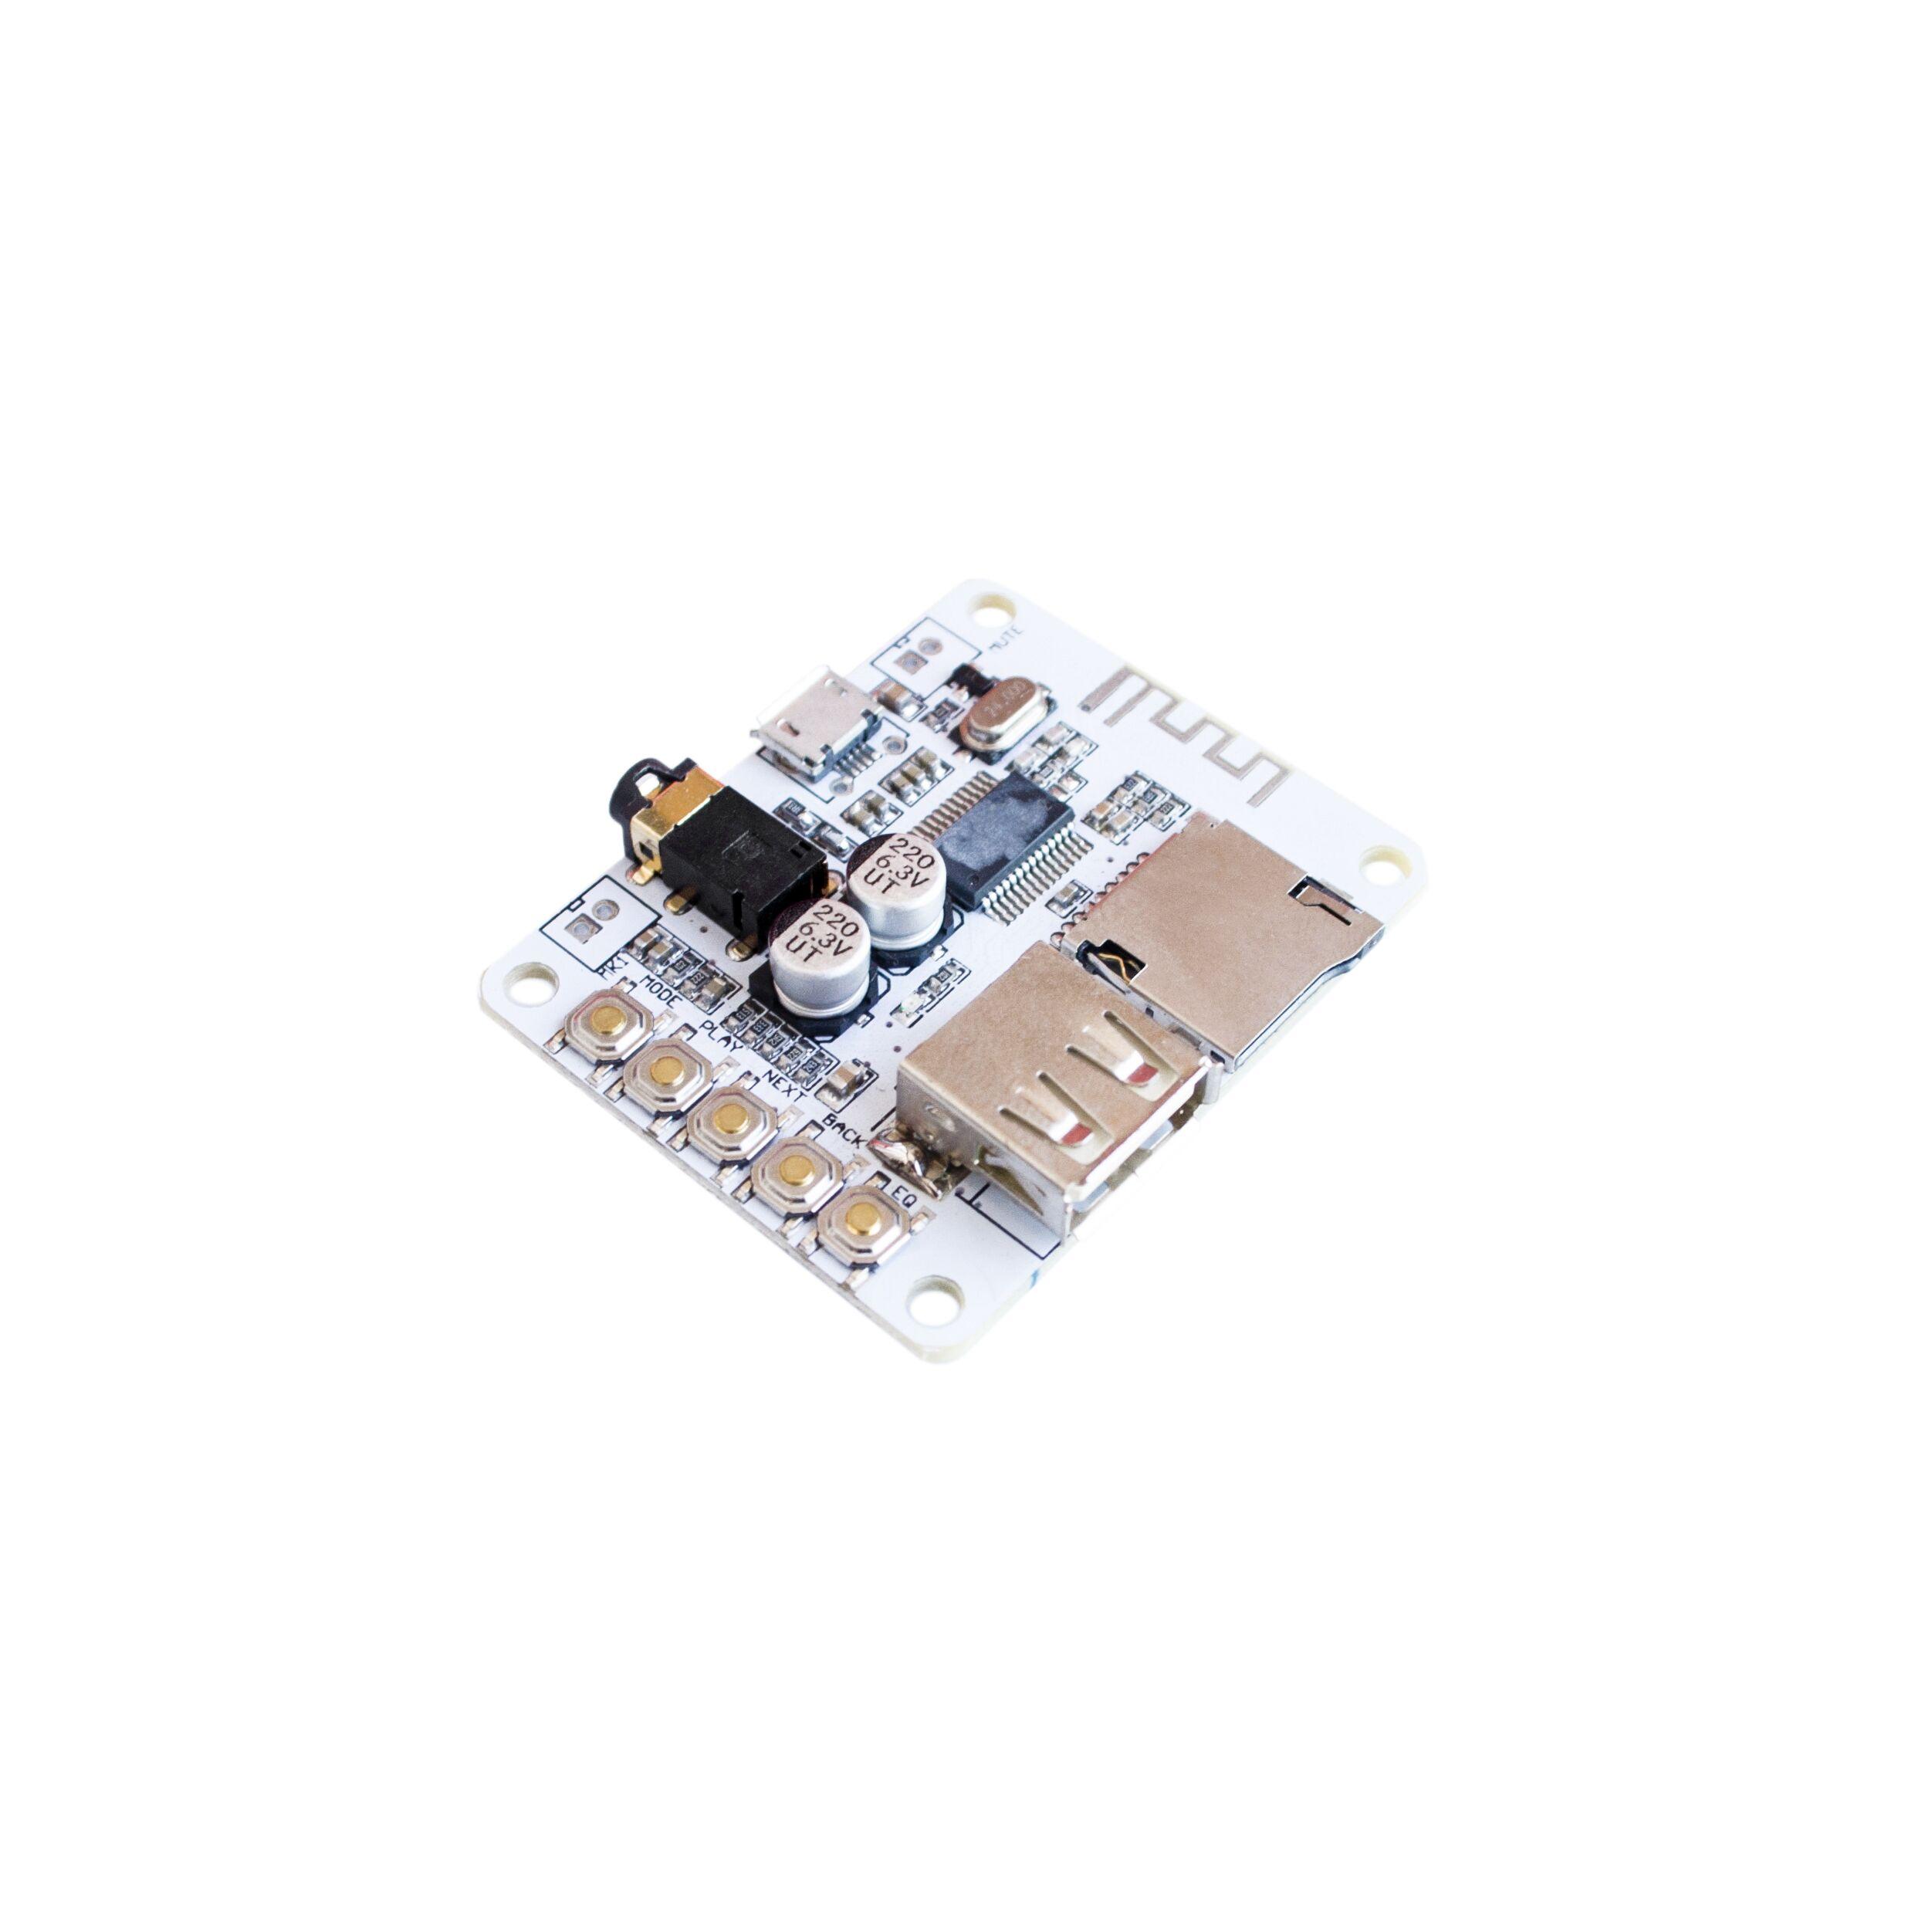 Bluetooth Audio Receiver board with USB TF card Slot decoding playback preamp output A7-004 5V 2.1 Wireless Stereo Music Module